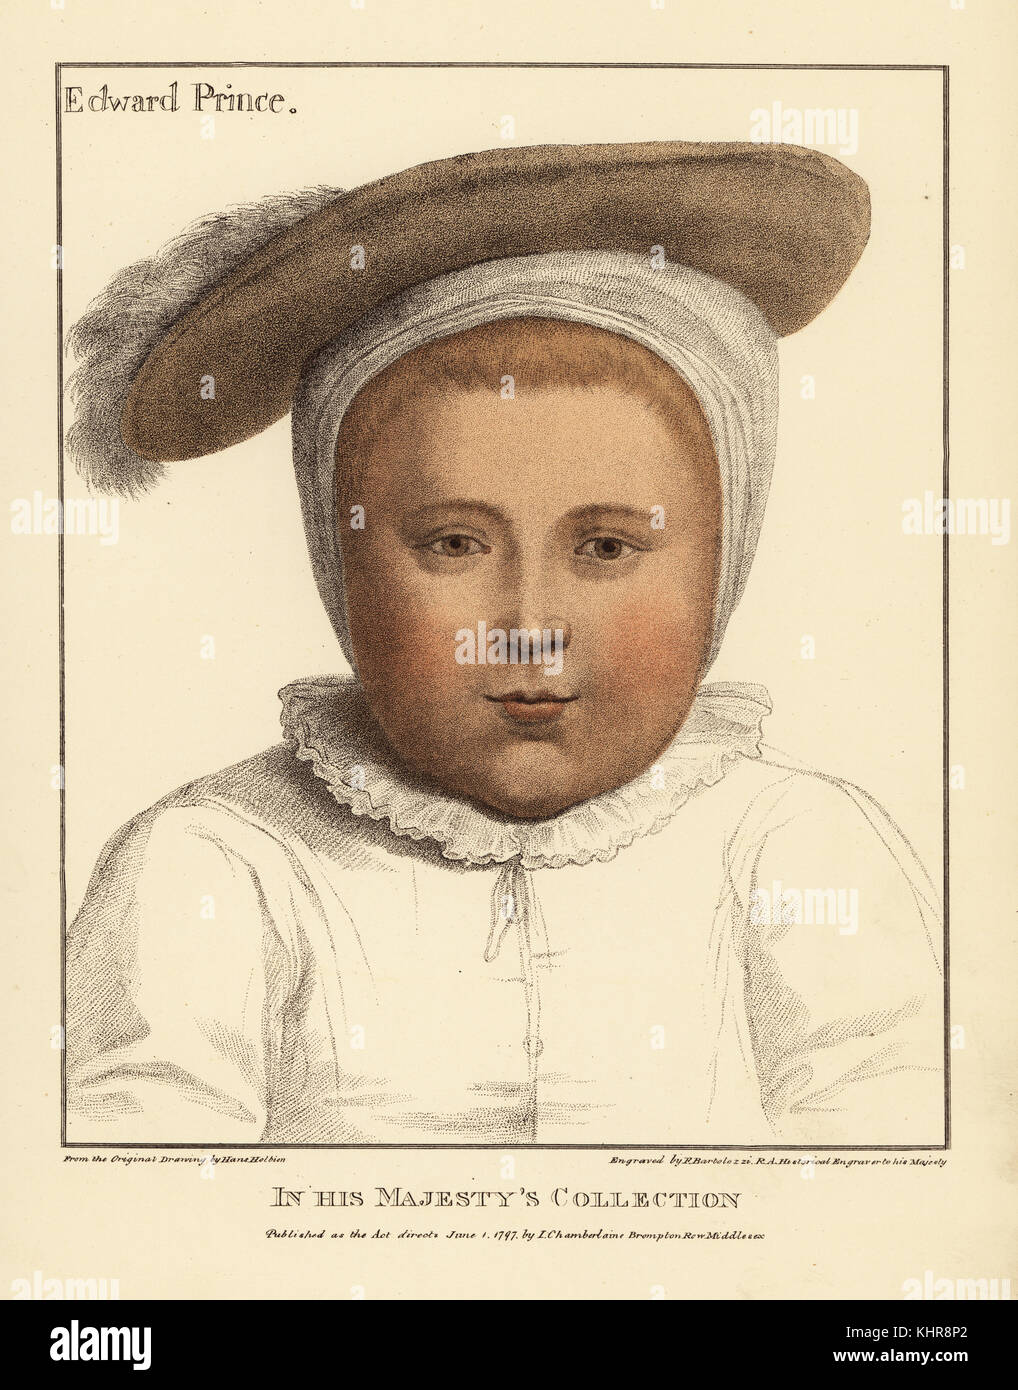 Prince Edward, aged 1, later King Edward VI of England, 1537-1553. Son of Henry VIII and Jane Seymour. Handcoloured copperplate engraving by Francis Bartolozzi after Hans Holbein from Facsimiles of Original Drawings by Hans Holbein, Hamilton, Adams, London, 1884. Stock Photo